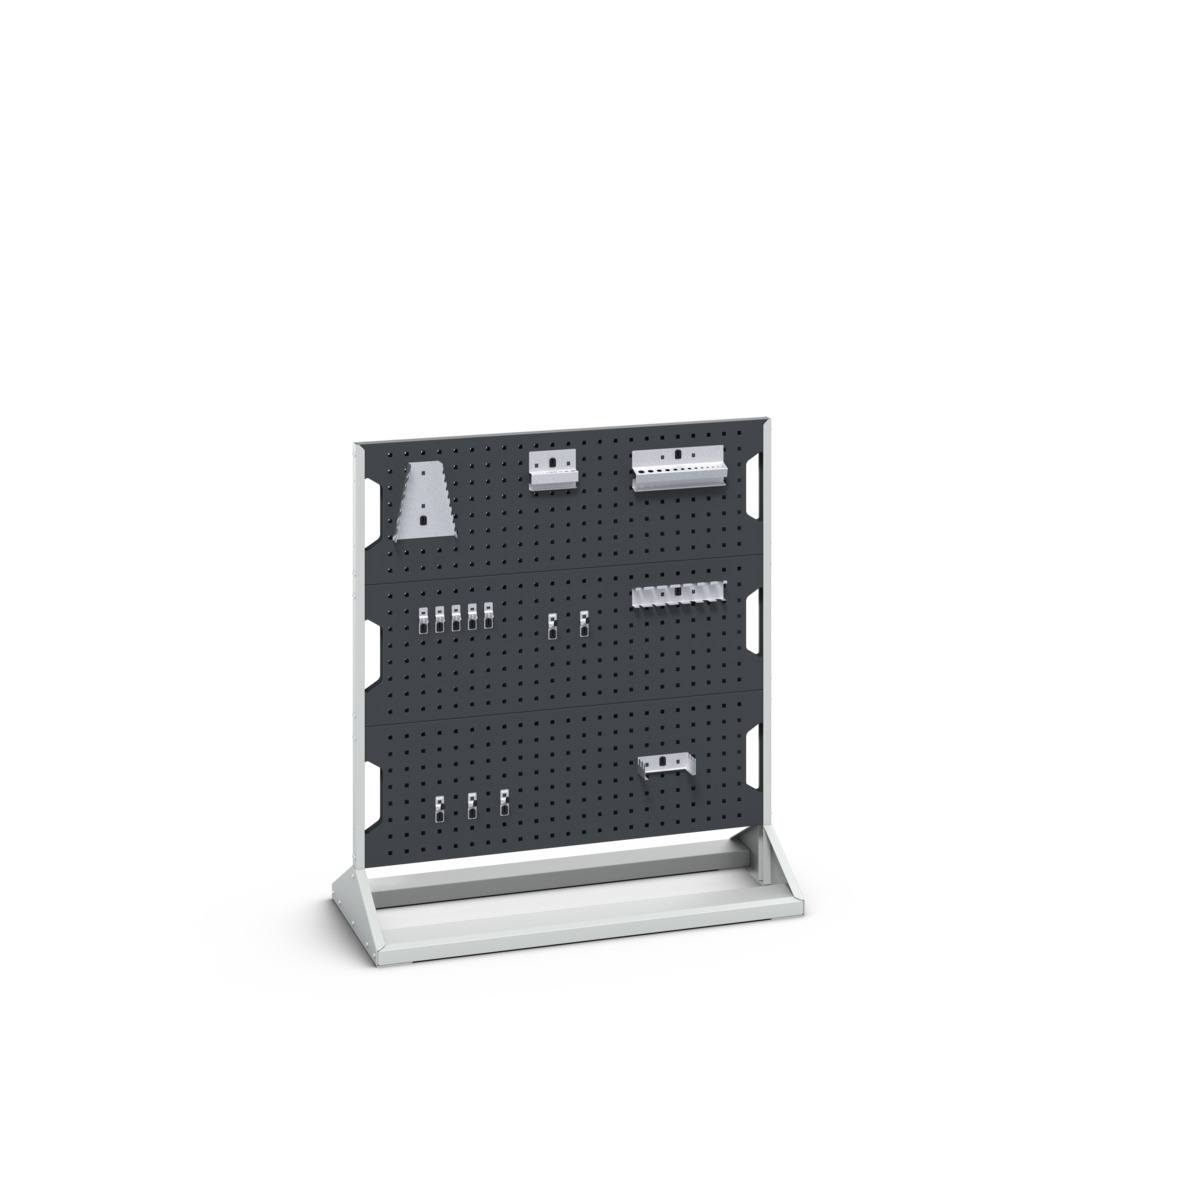 16917200. - Rack Perfo Fixe Double Face & Acc